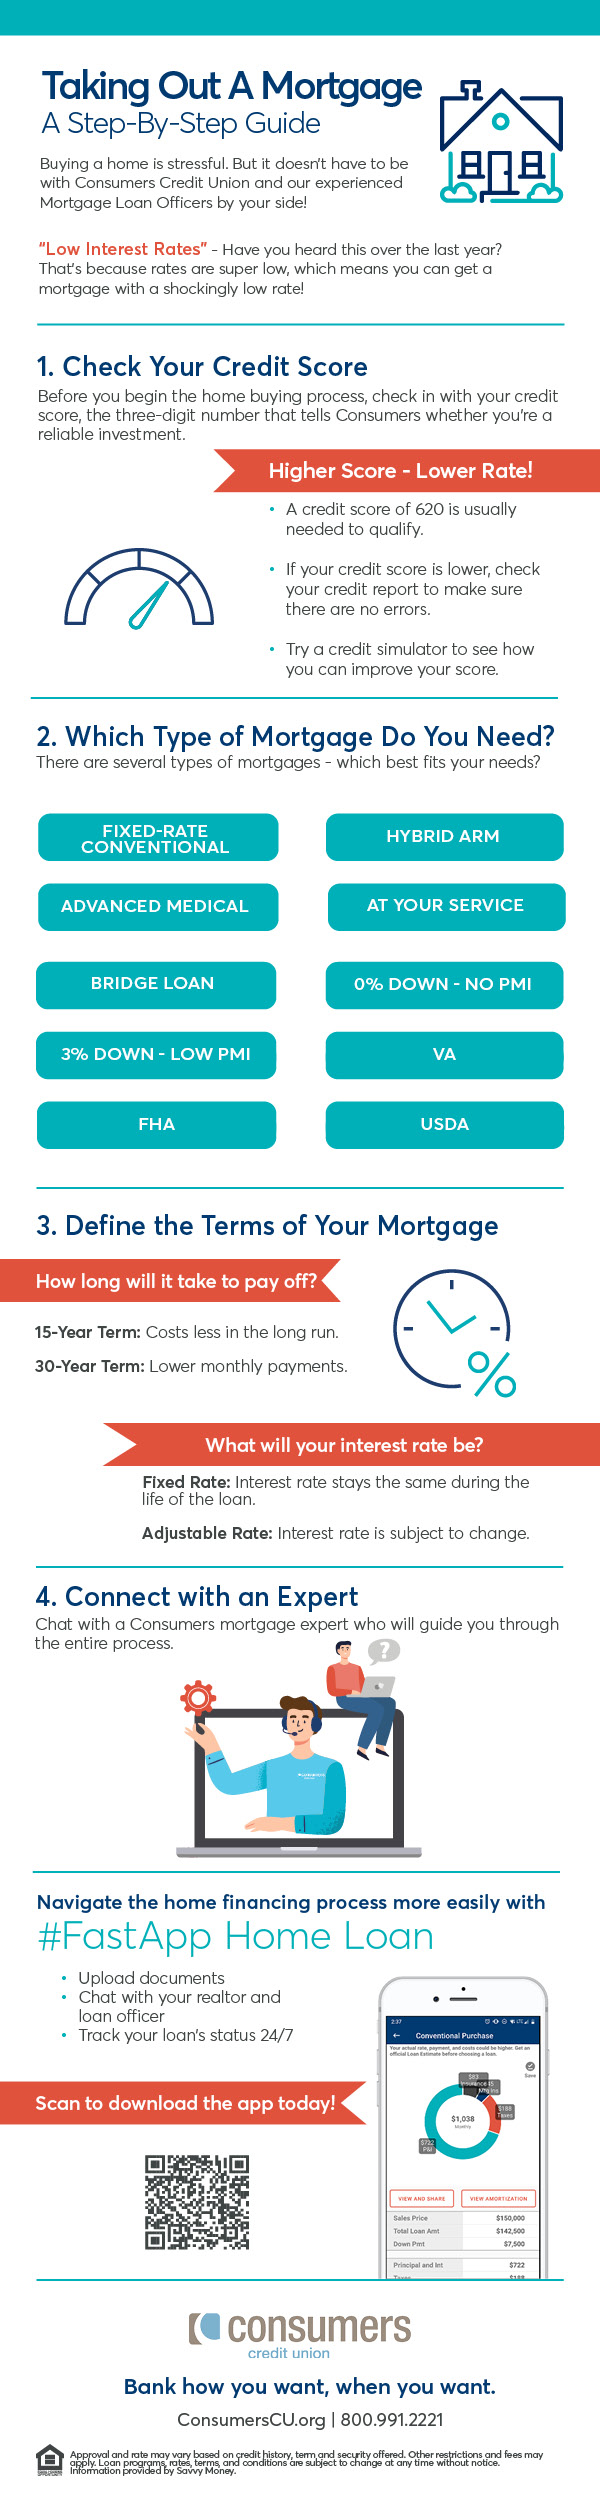 Taking Out a Mortgage: A step-by-step guide